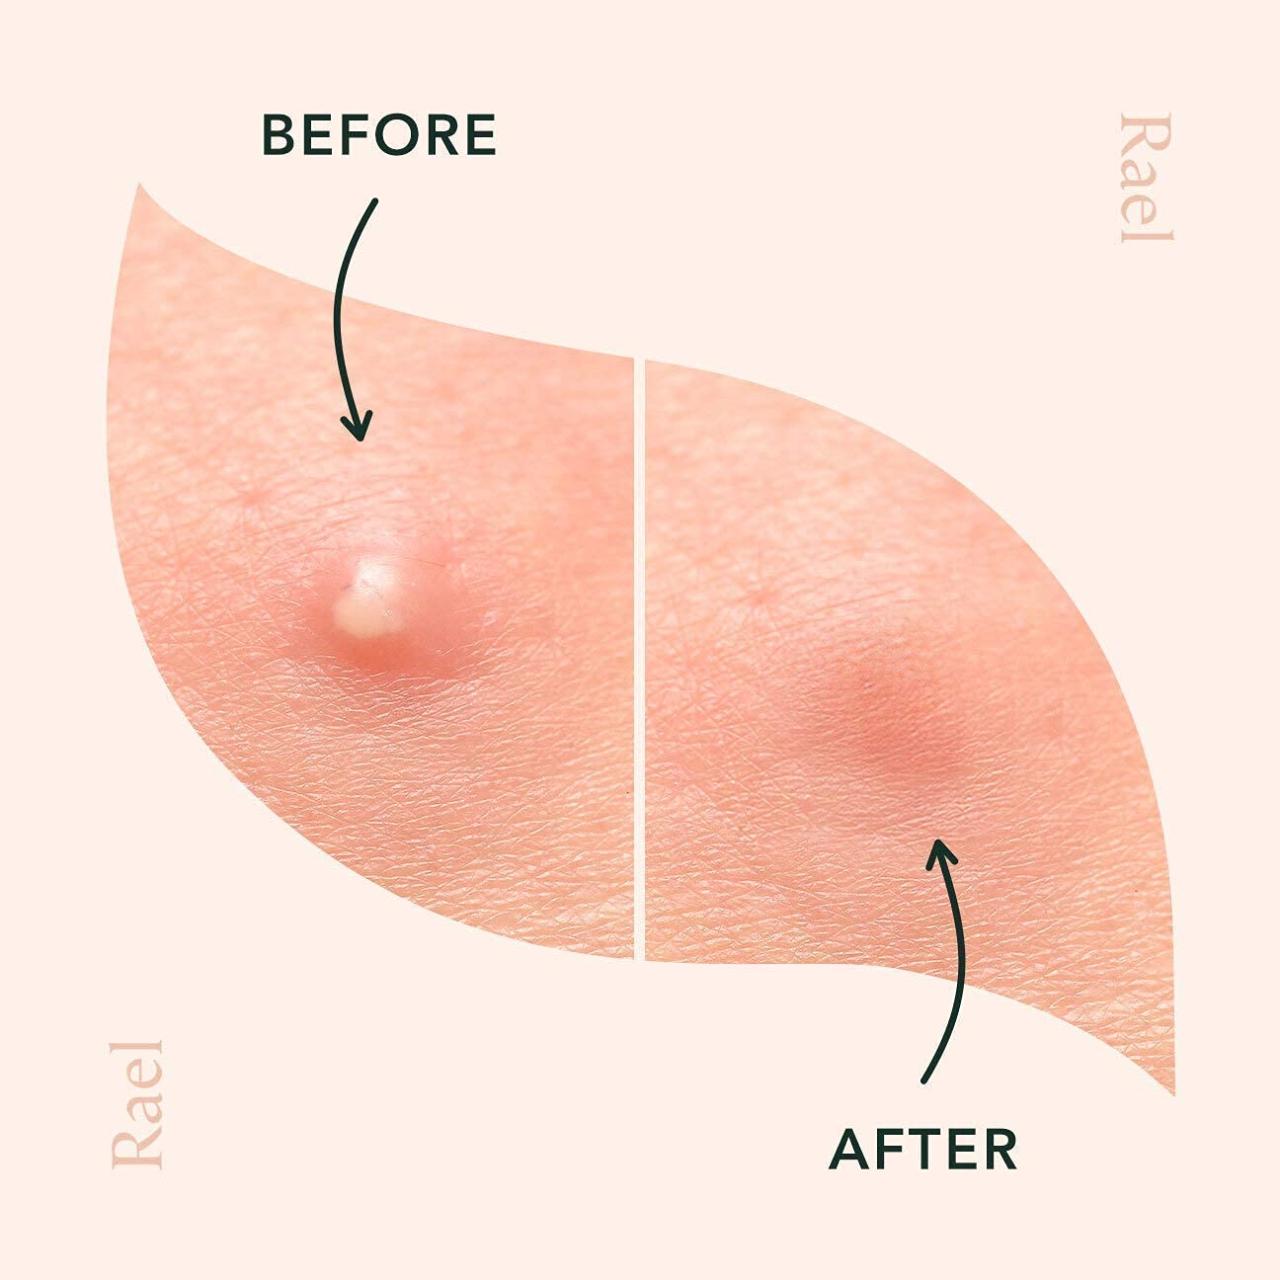 Hydrocolloid Patches 2021: Do Pimple Patches Really Work For Acne